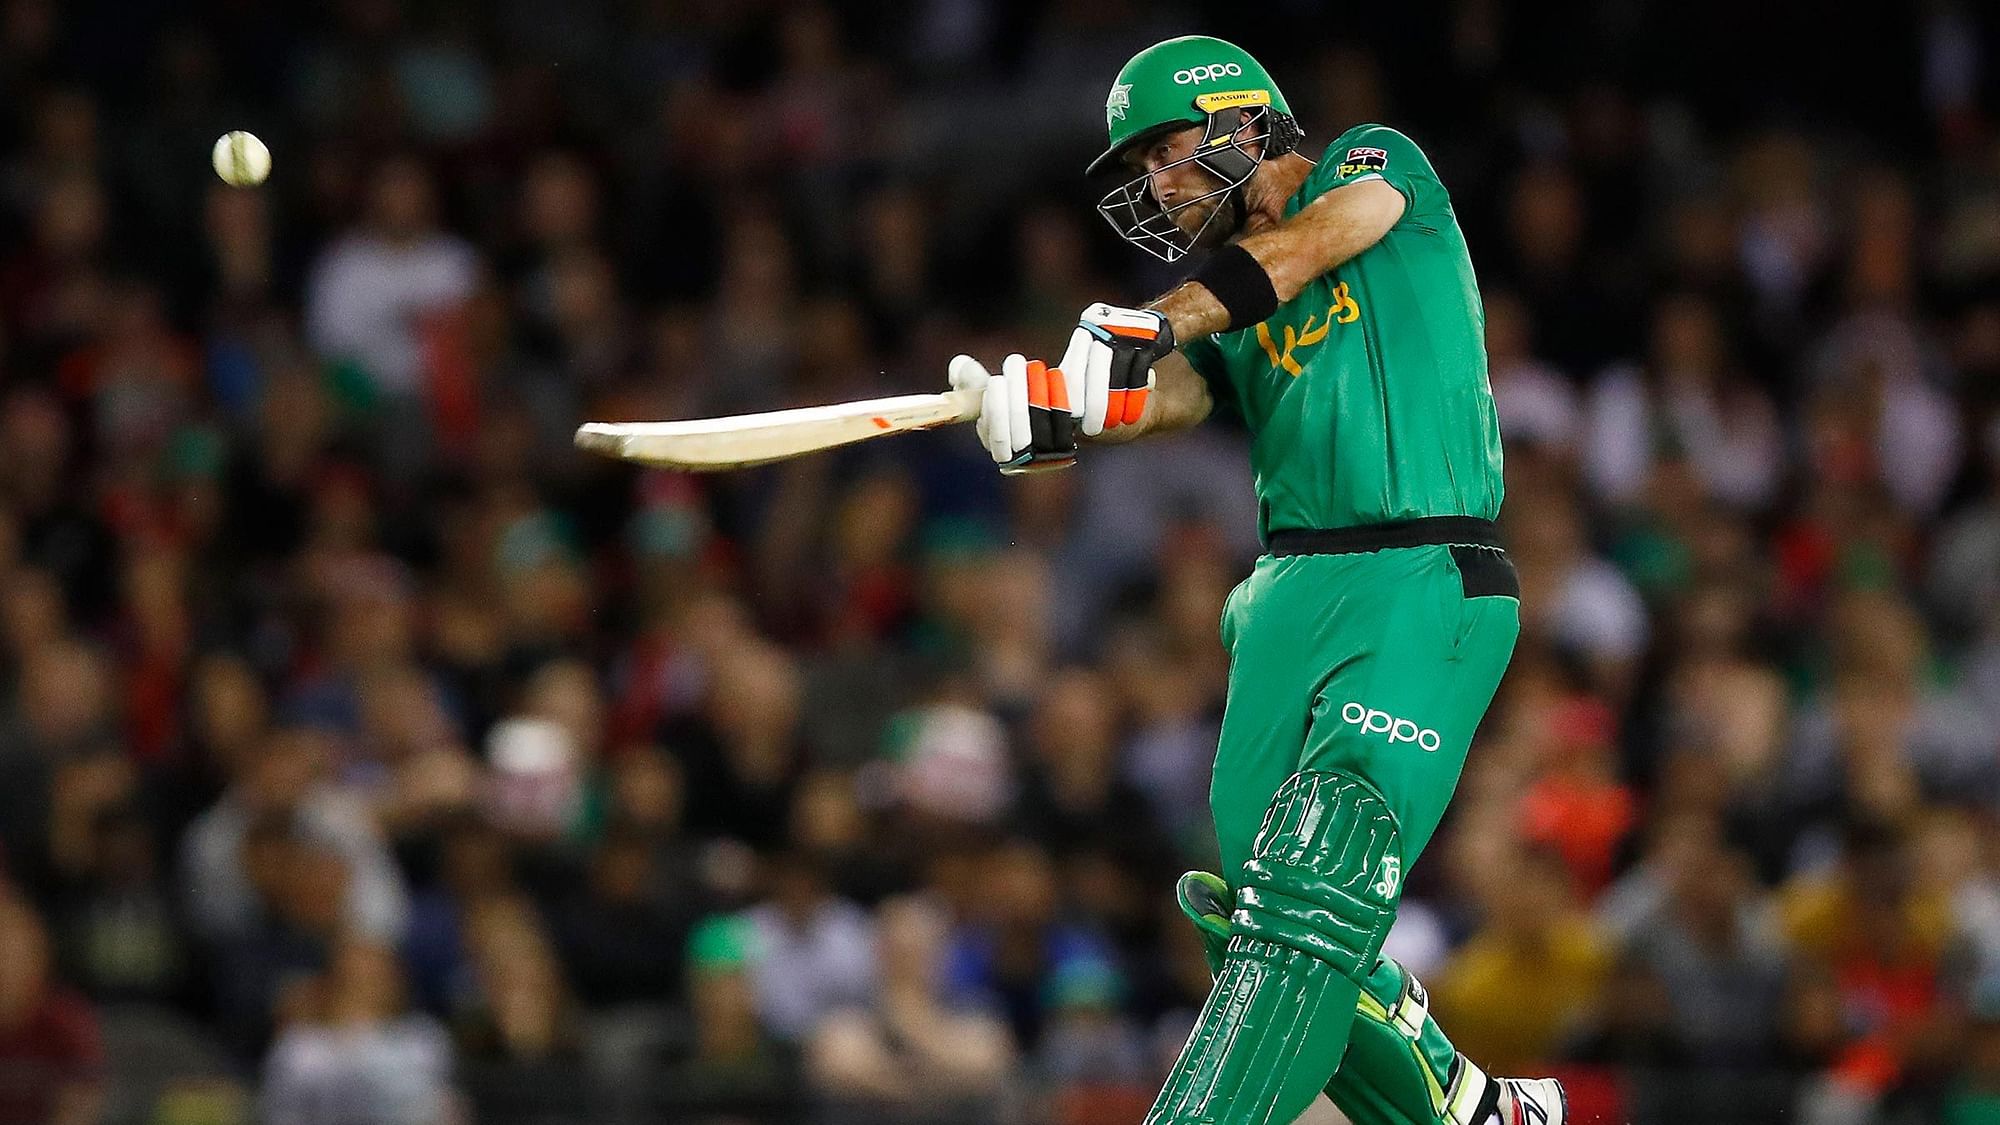 Glenn Maxwell had taken a break from cricket to deal with his mental health last year.